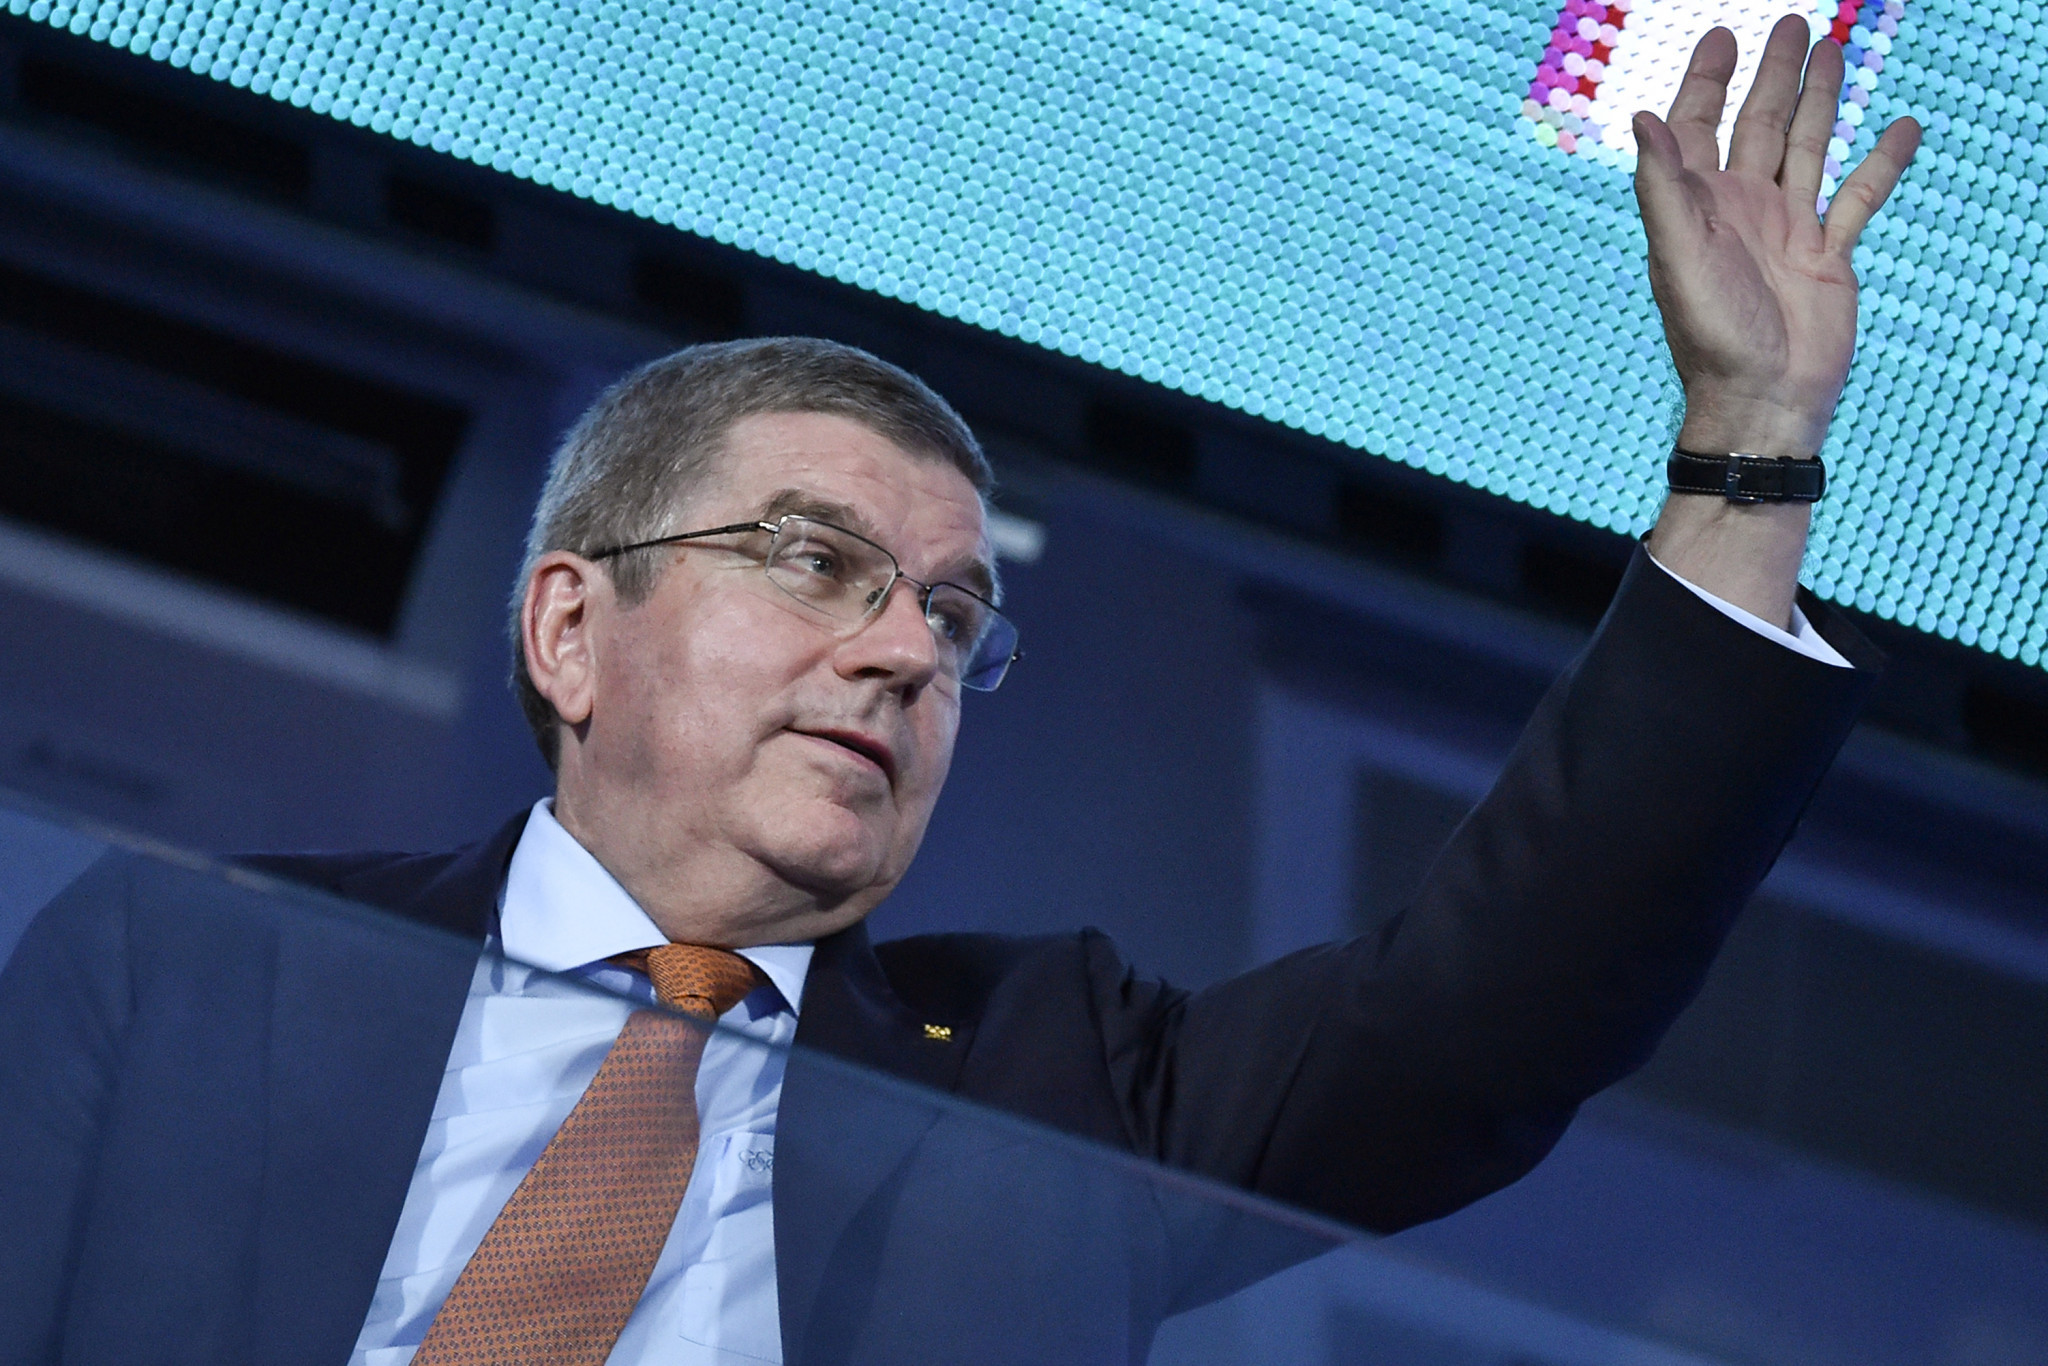 The IOC's President, Thomas Bach, attended Sunday's European Games Closing Ceremony in Minsk ©Getty Images